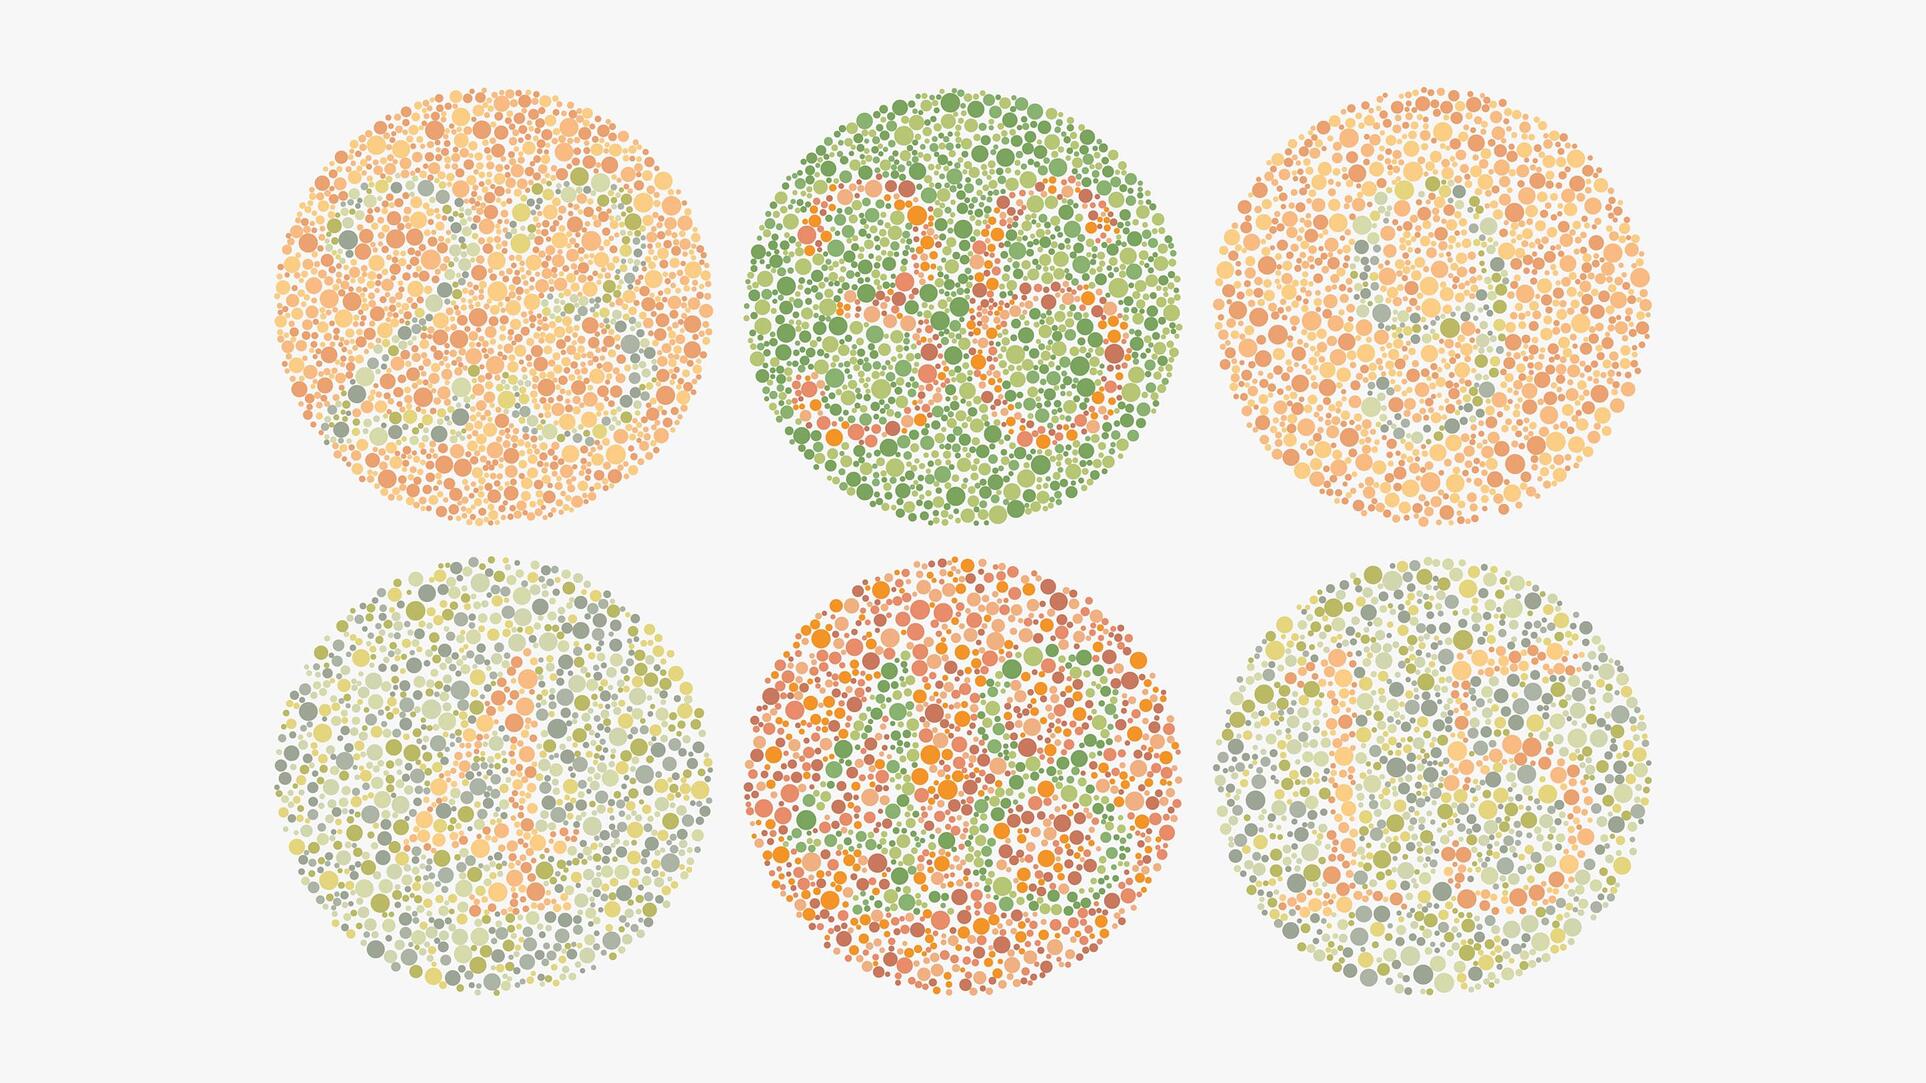 Red-green color blindness is the most common type of color blindness, characterized by difficulty distinguishing between red and green colors.